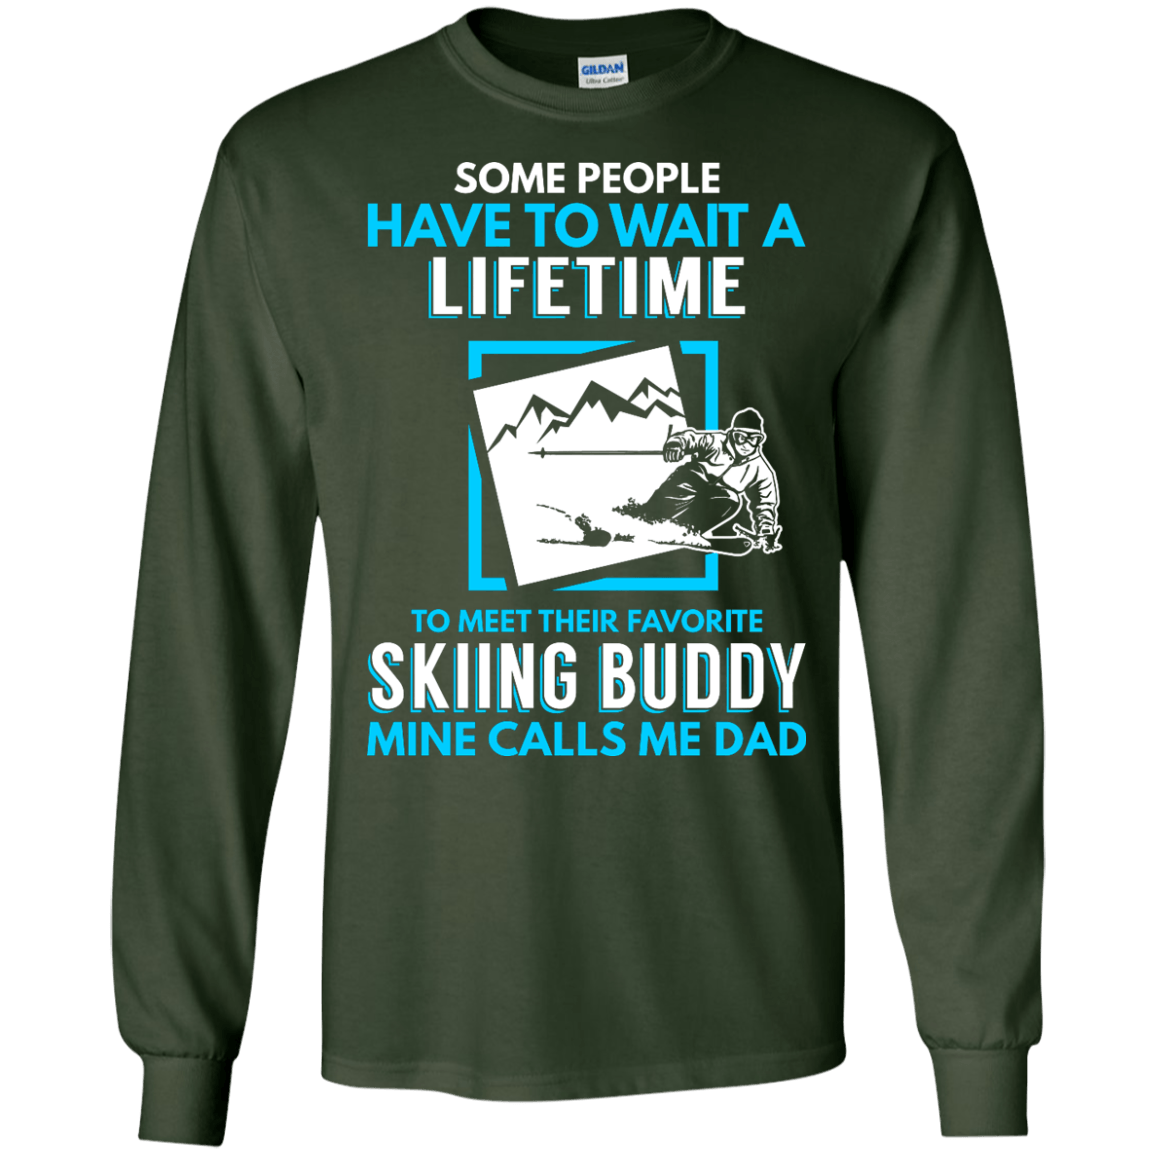 Some People Have To Wait A Lifetime To Meet Their Their Favorite Skiing Buddy Mine Calls Me Dad - Long Sleeves - Powderaddicts